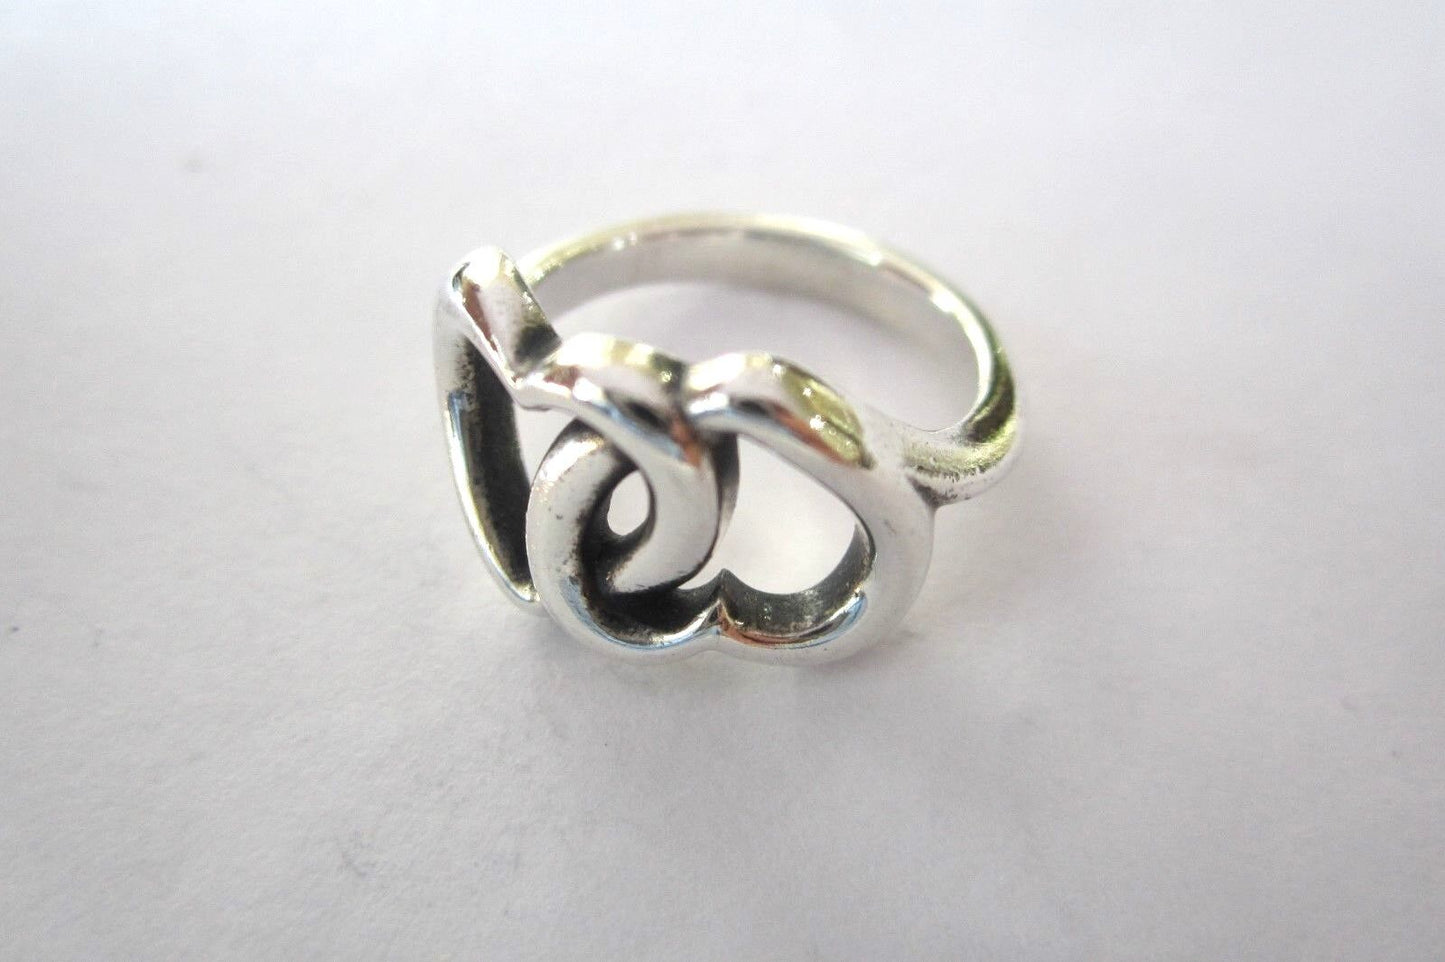 VERY NICE  James Avery Linked Hearts Ring Sz 6.25 Sterling Silver .925